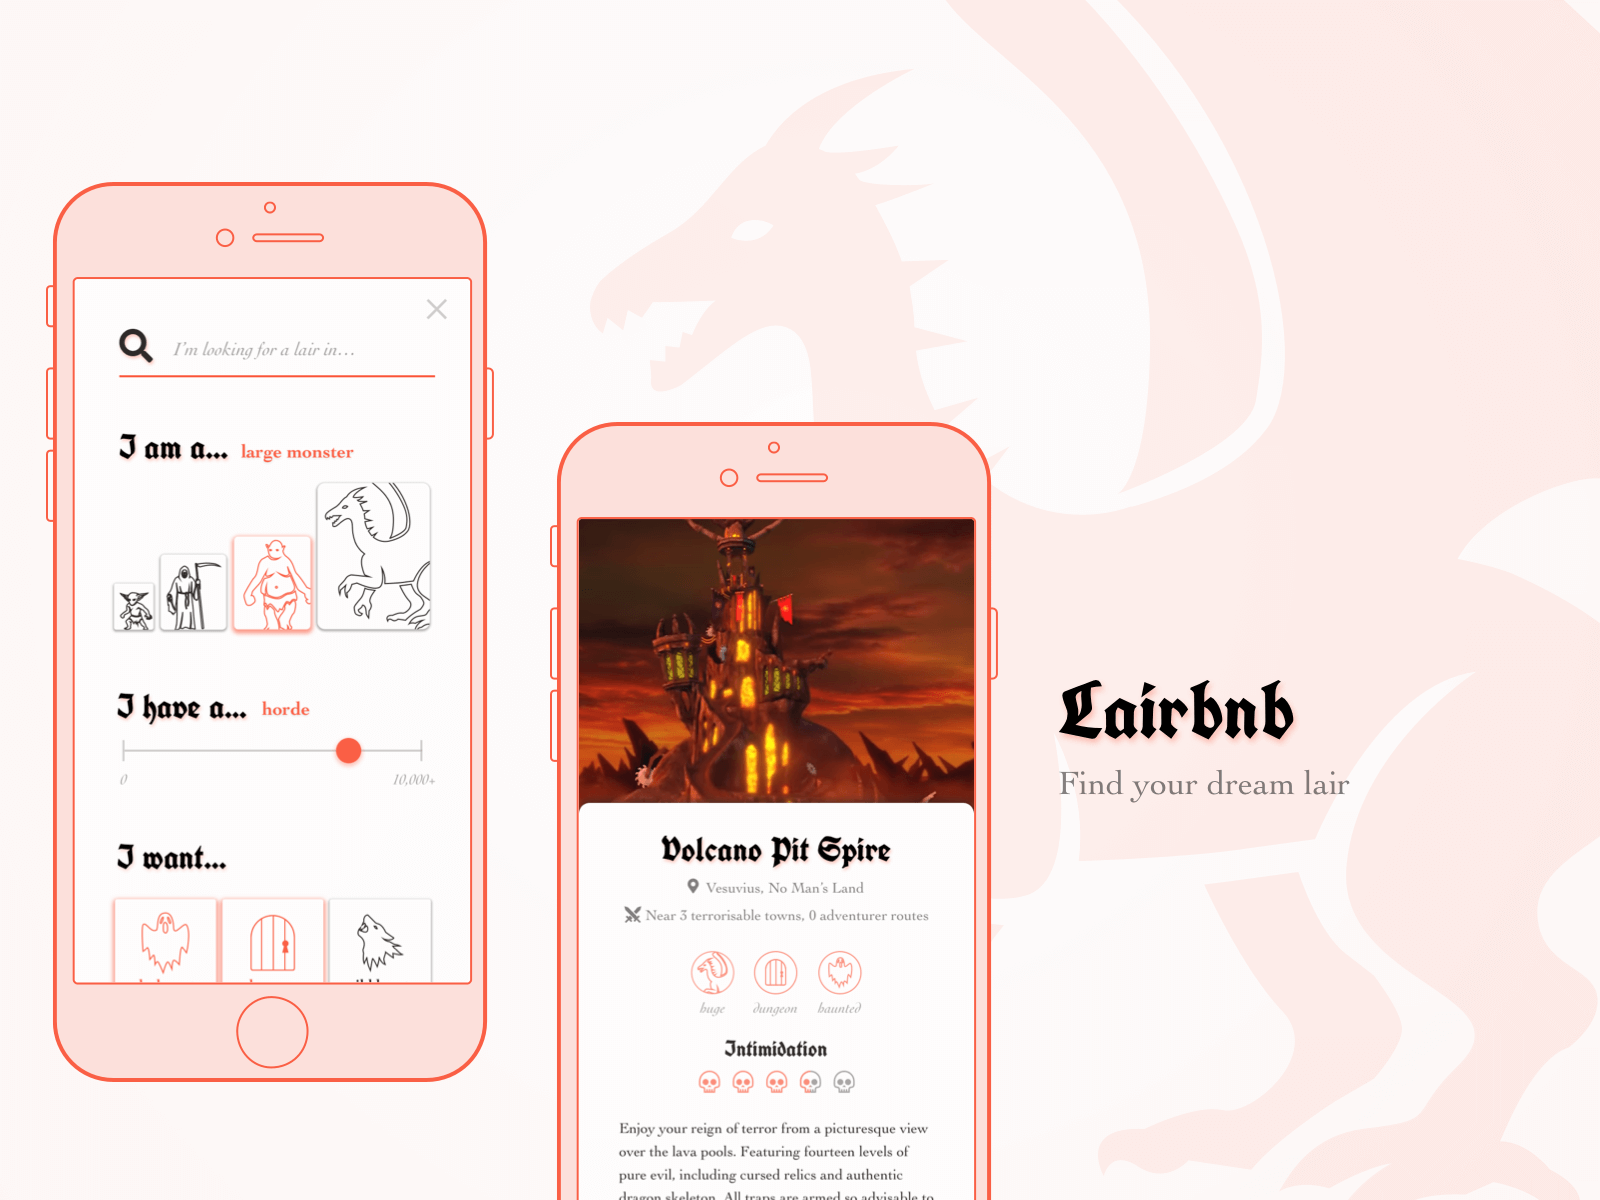 Lairbnb app screenshots, showcasing how monsters can find their dream lair by selecting their needs and viewing properties.